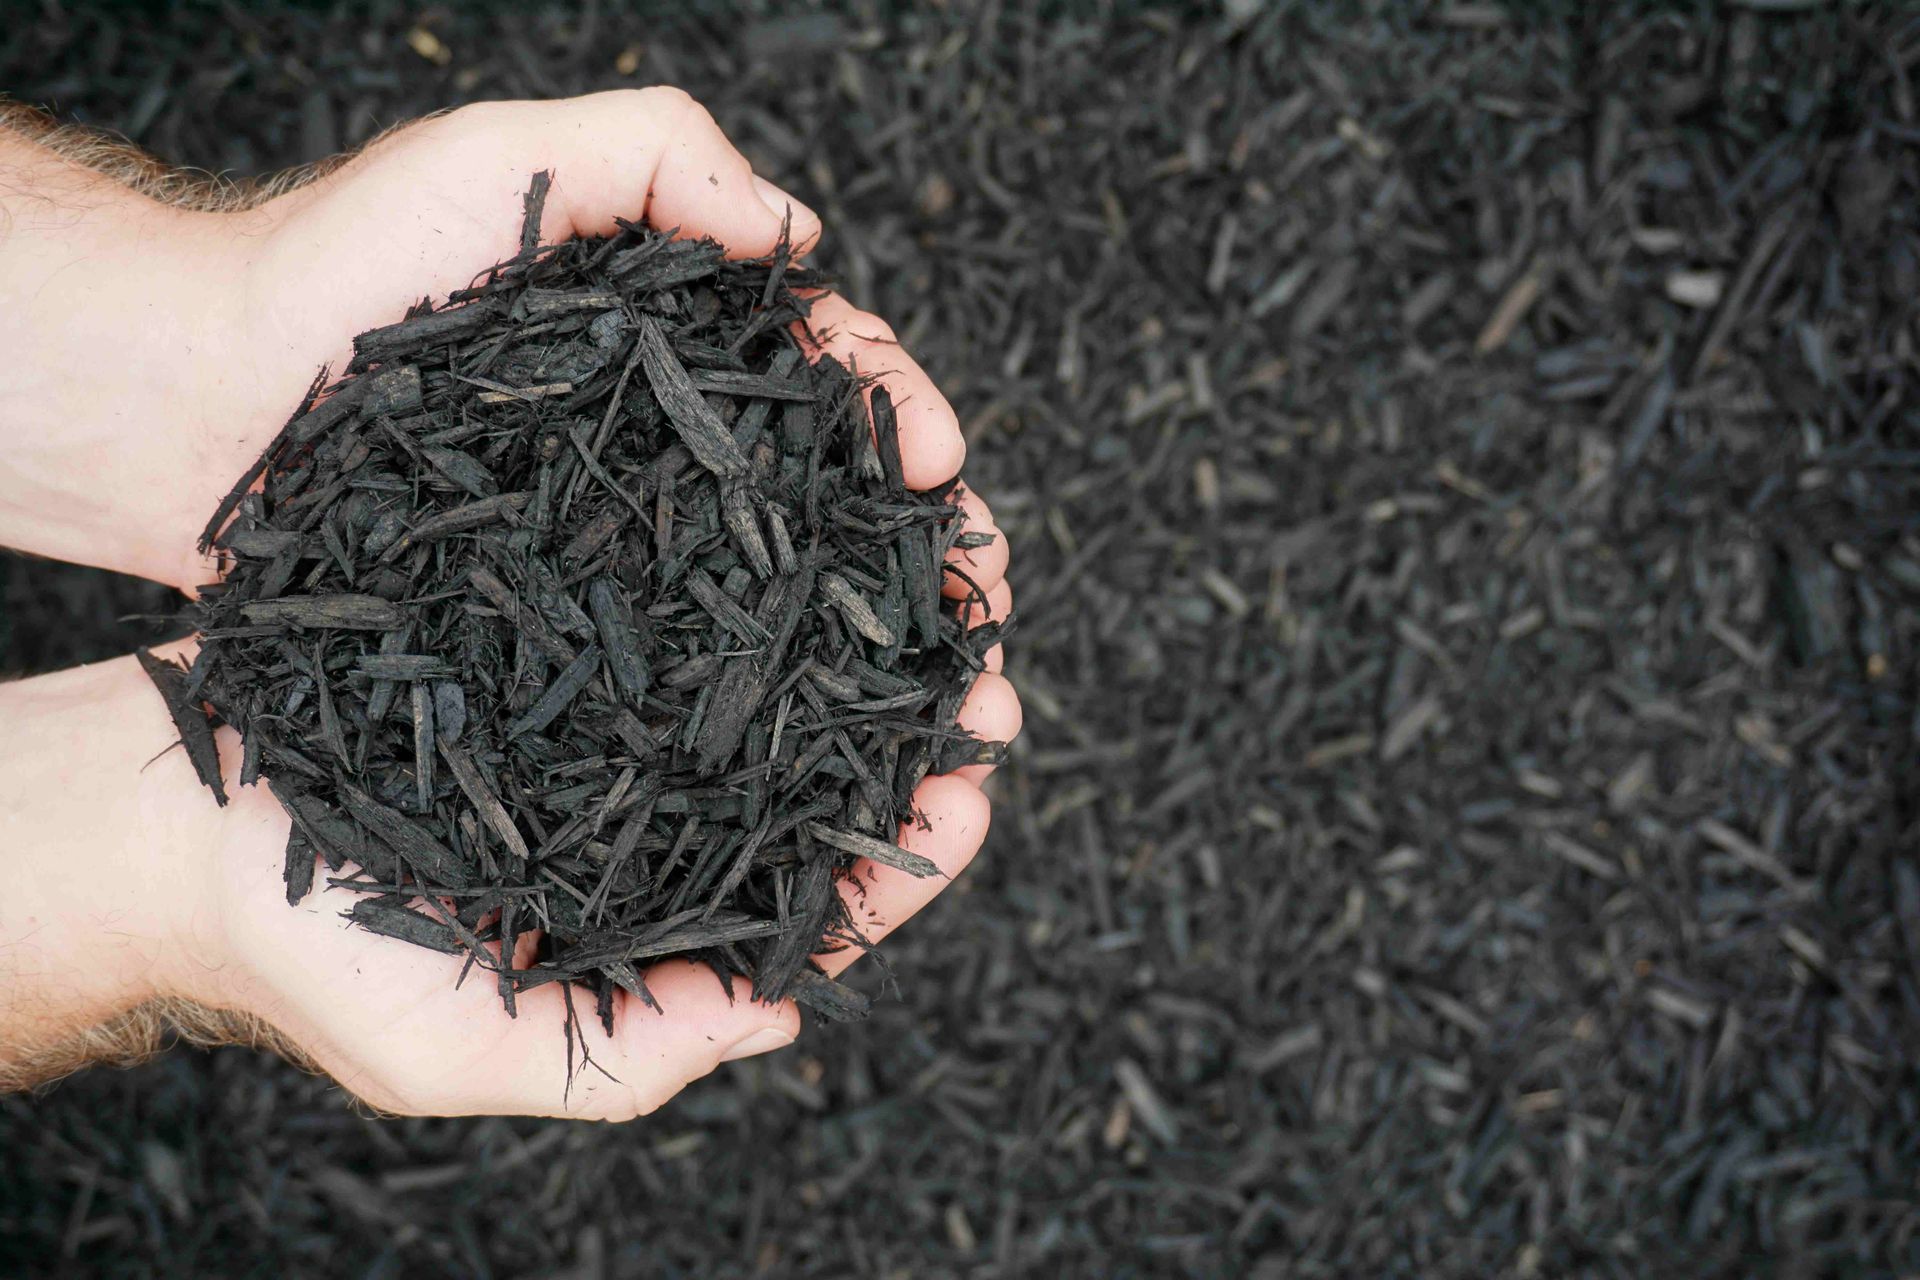 Dyed Colonial Black Mulch For Sale. Bulk Black Mulch Delivered to Lebanon, Annville, Palmyra, & Cornwall.